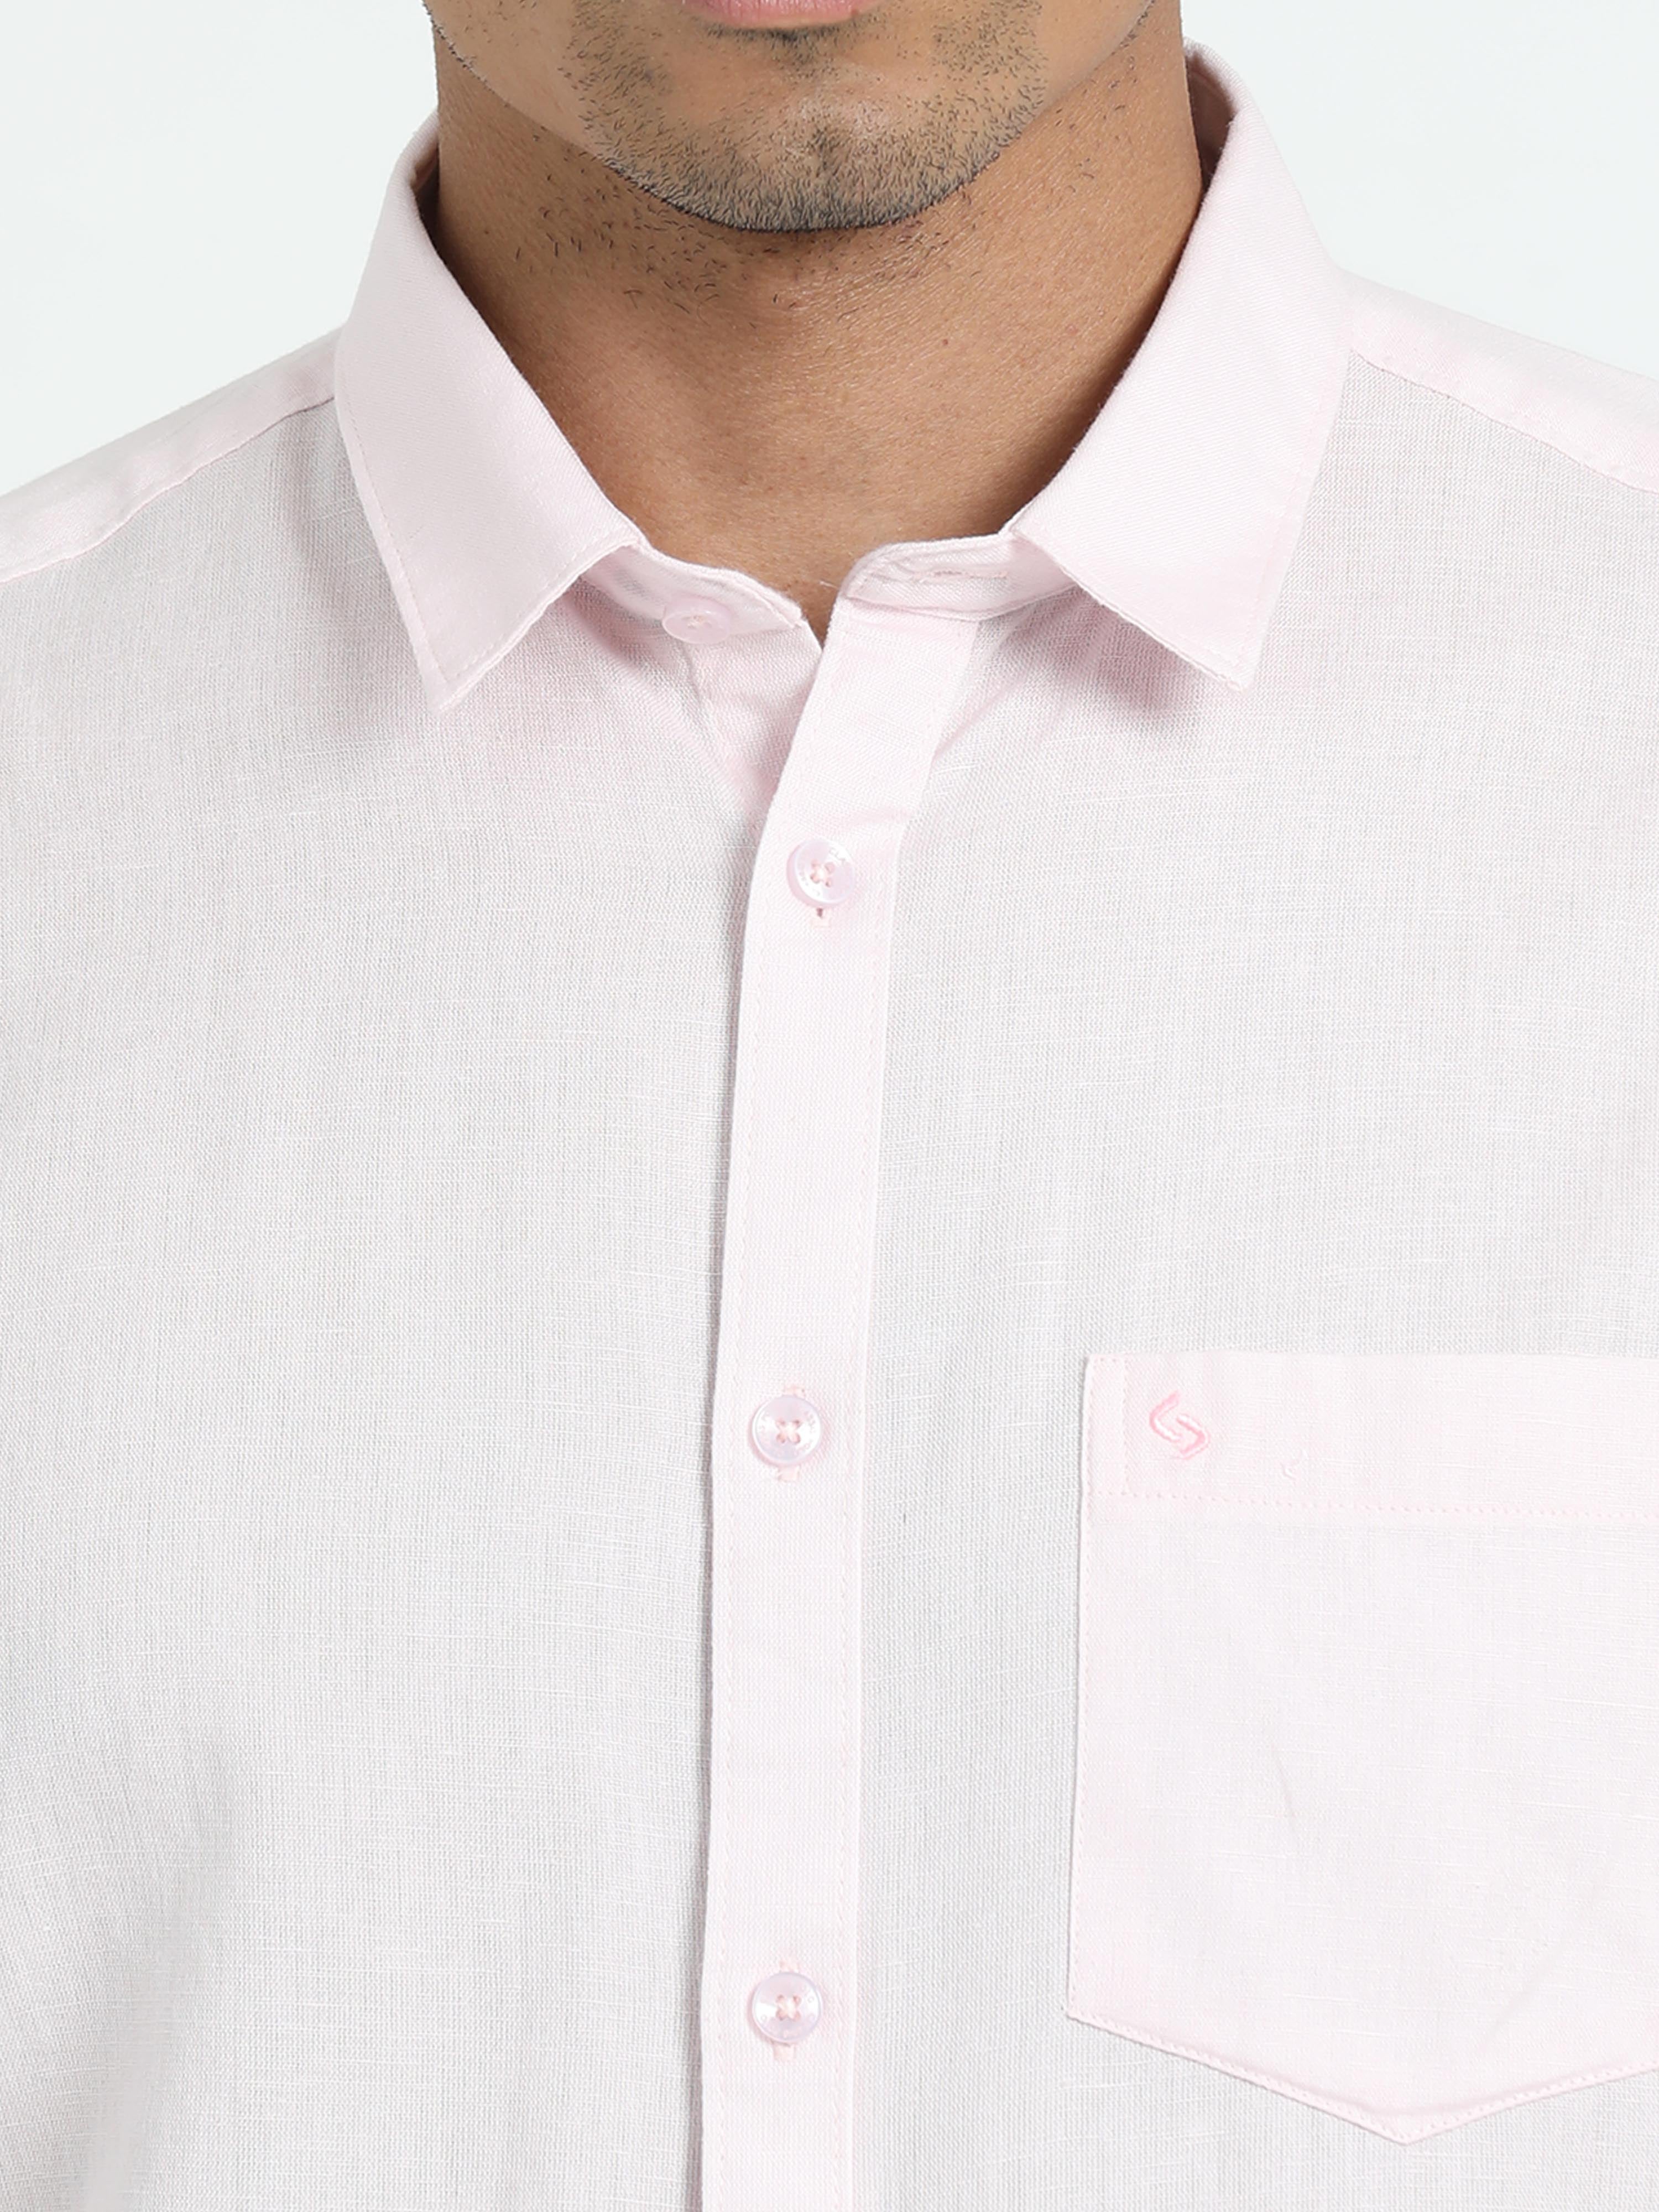 Classic Polo Men's Solid Pink Cotton Linen Full Sleeve Woven Shirt | DAMASK-PINK-SF-FS